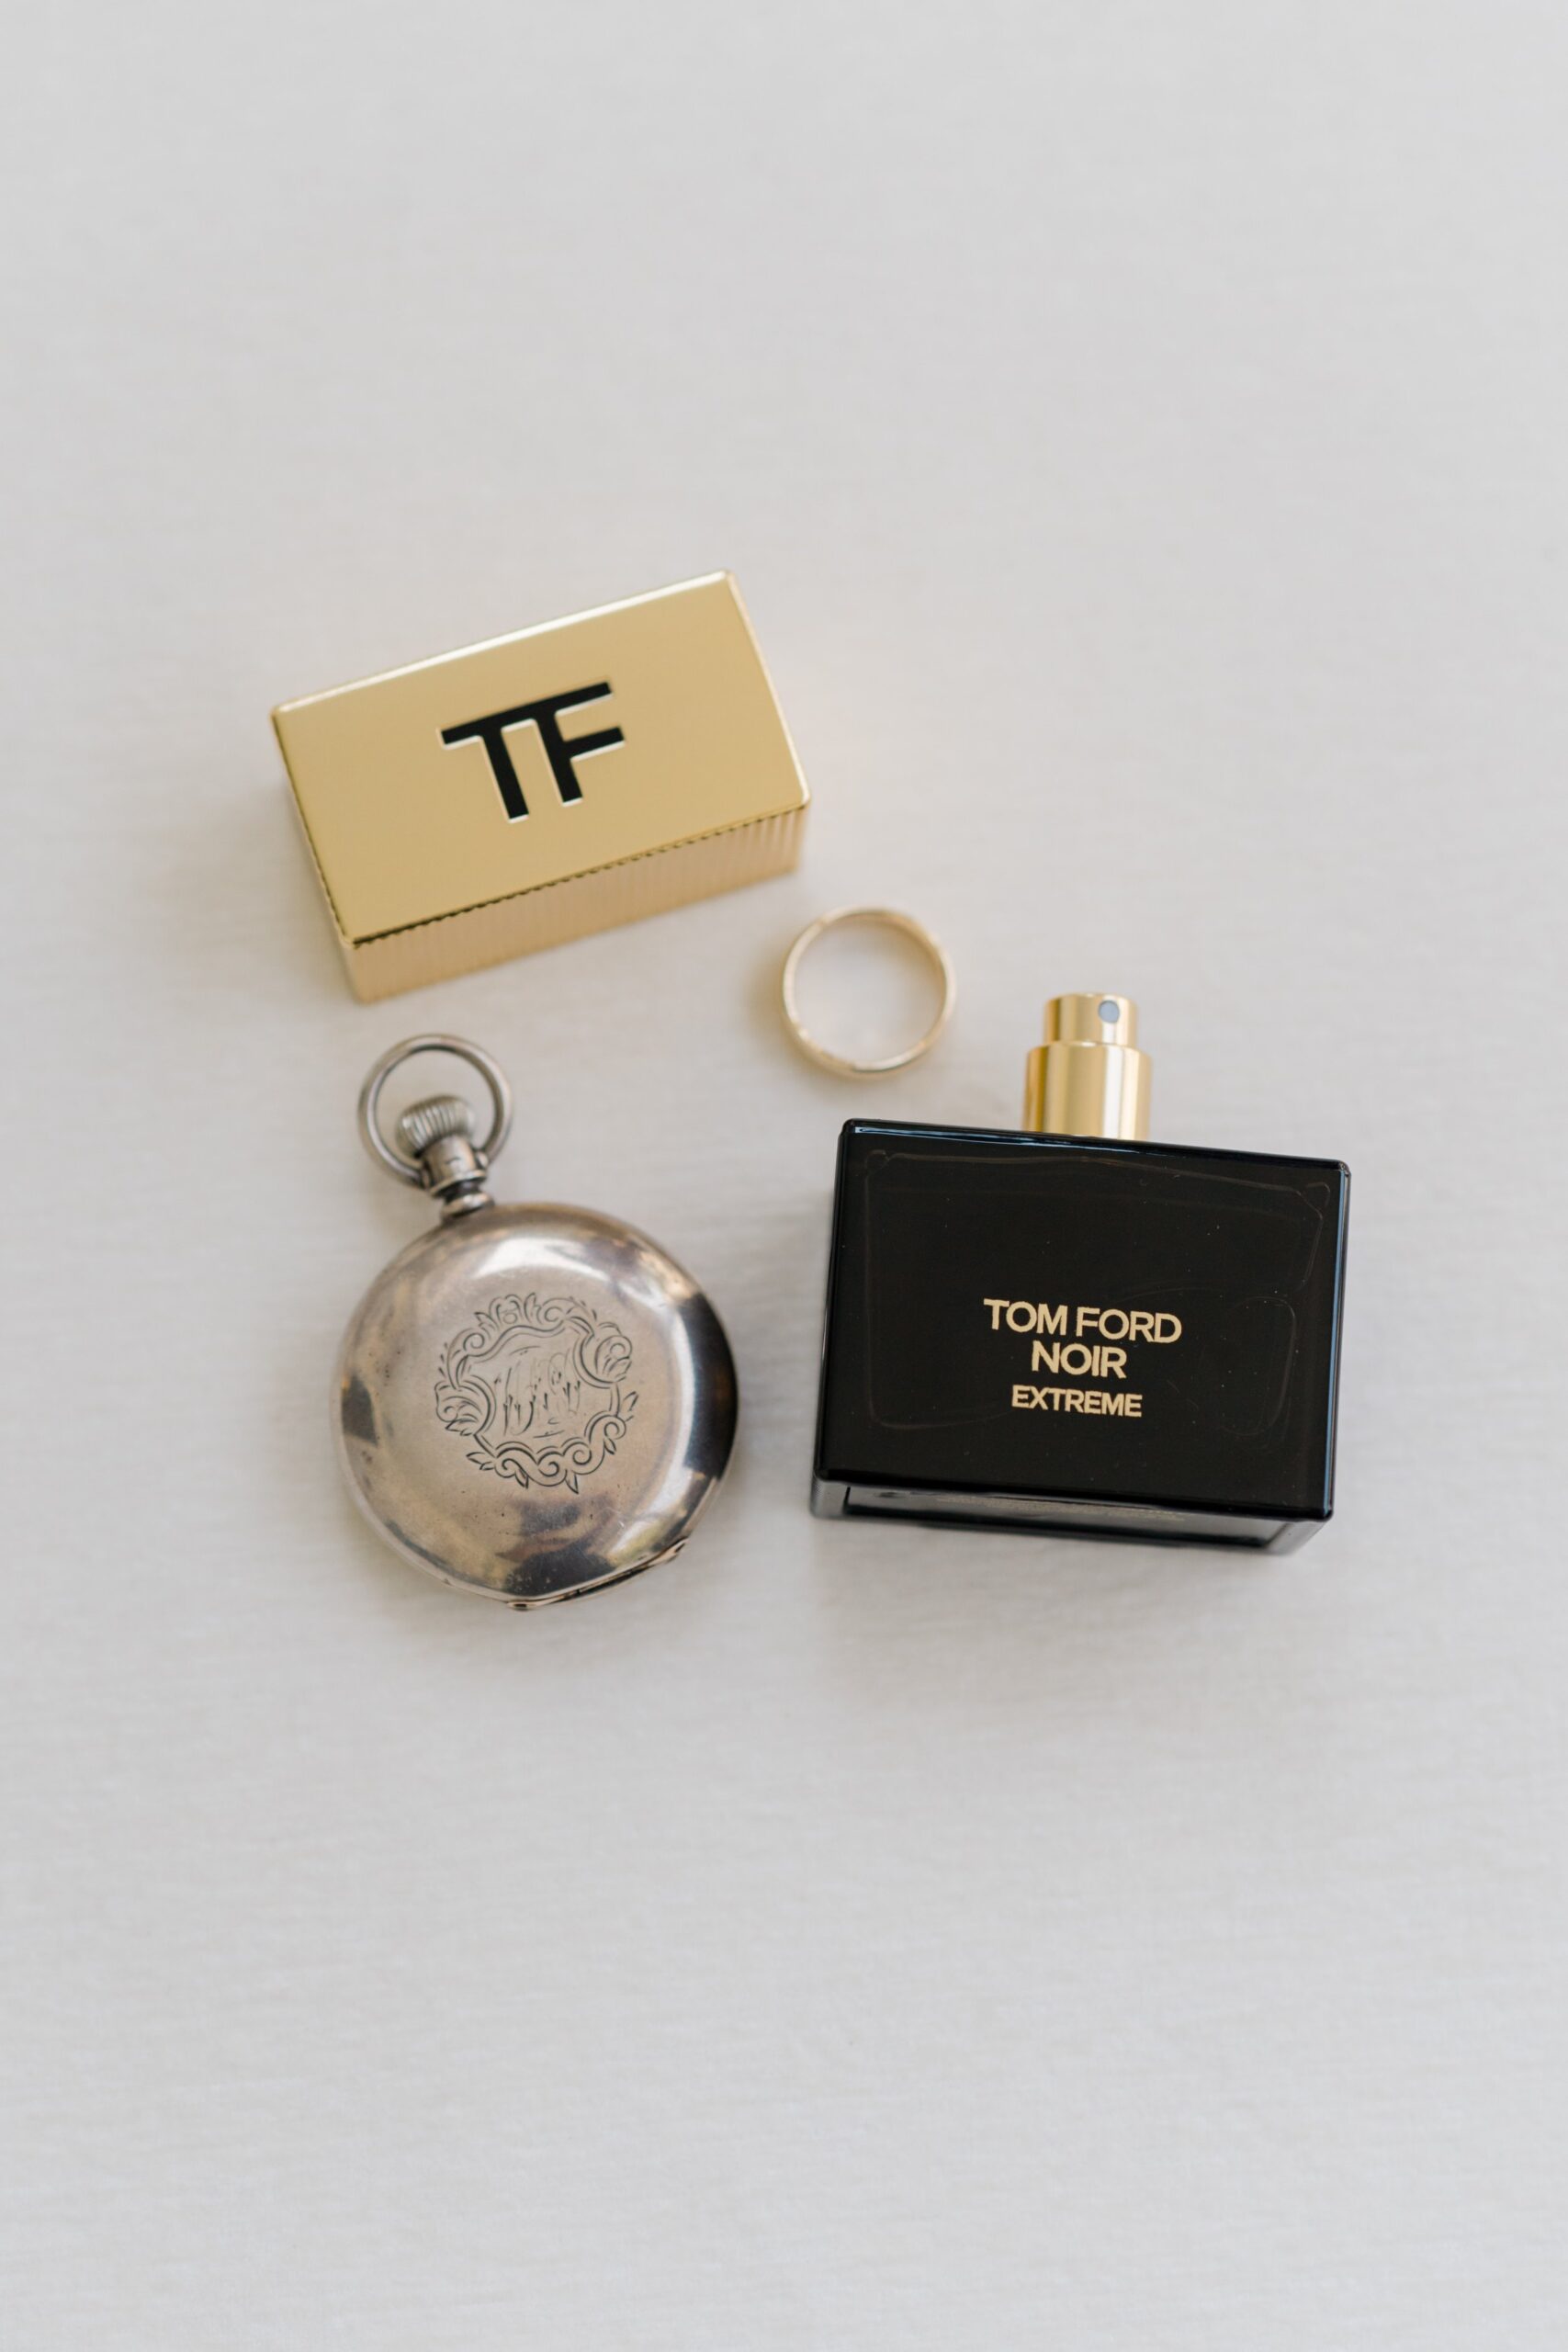 Tom Ford groom details with vintage pocket watch from grandfather